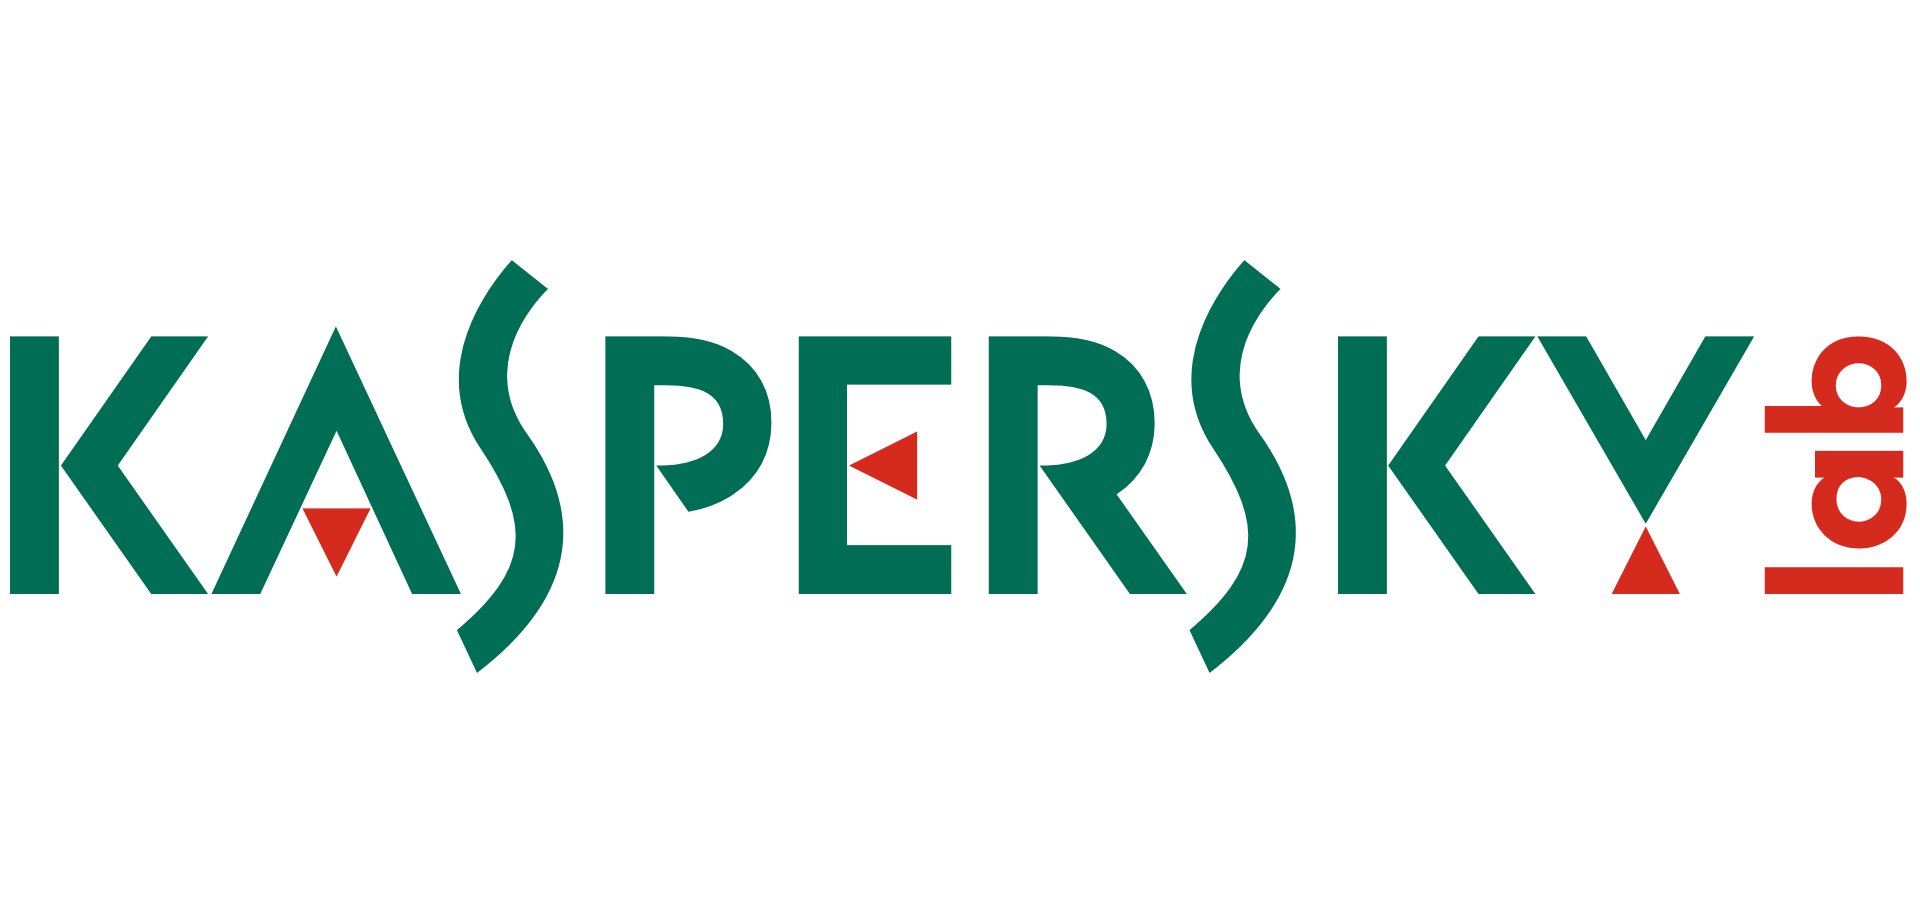 Kaspersky small business or enterprise software license it product